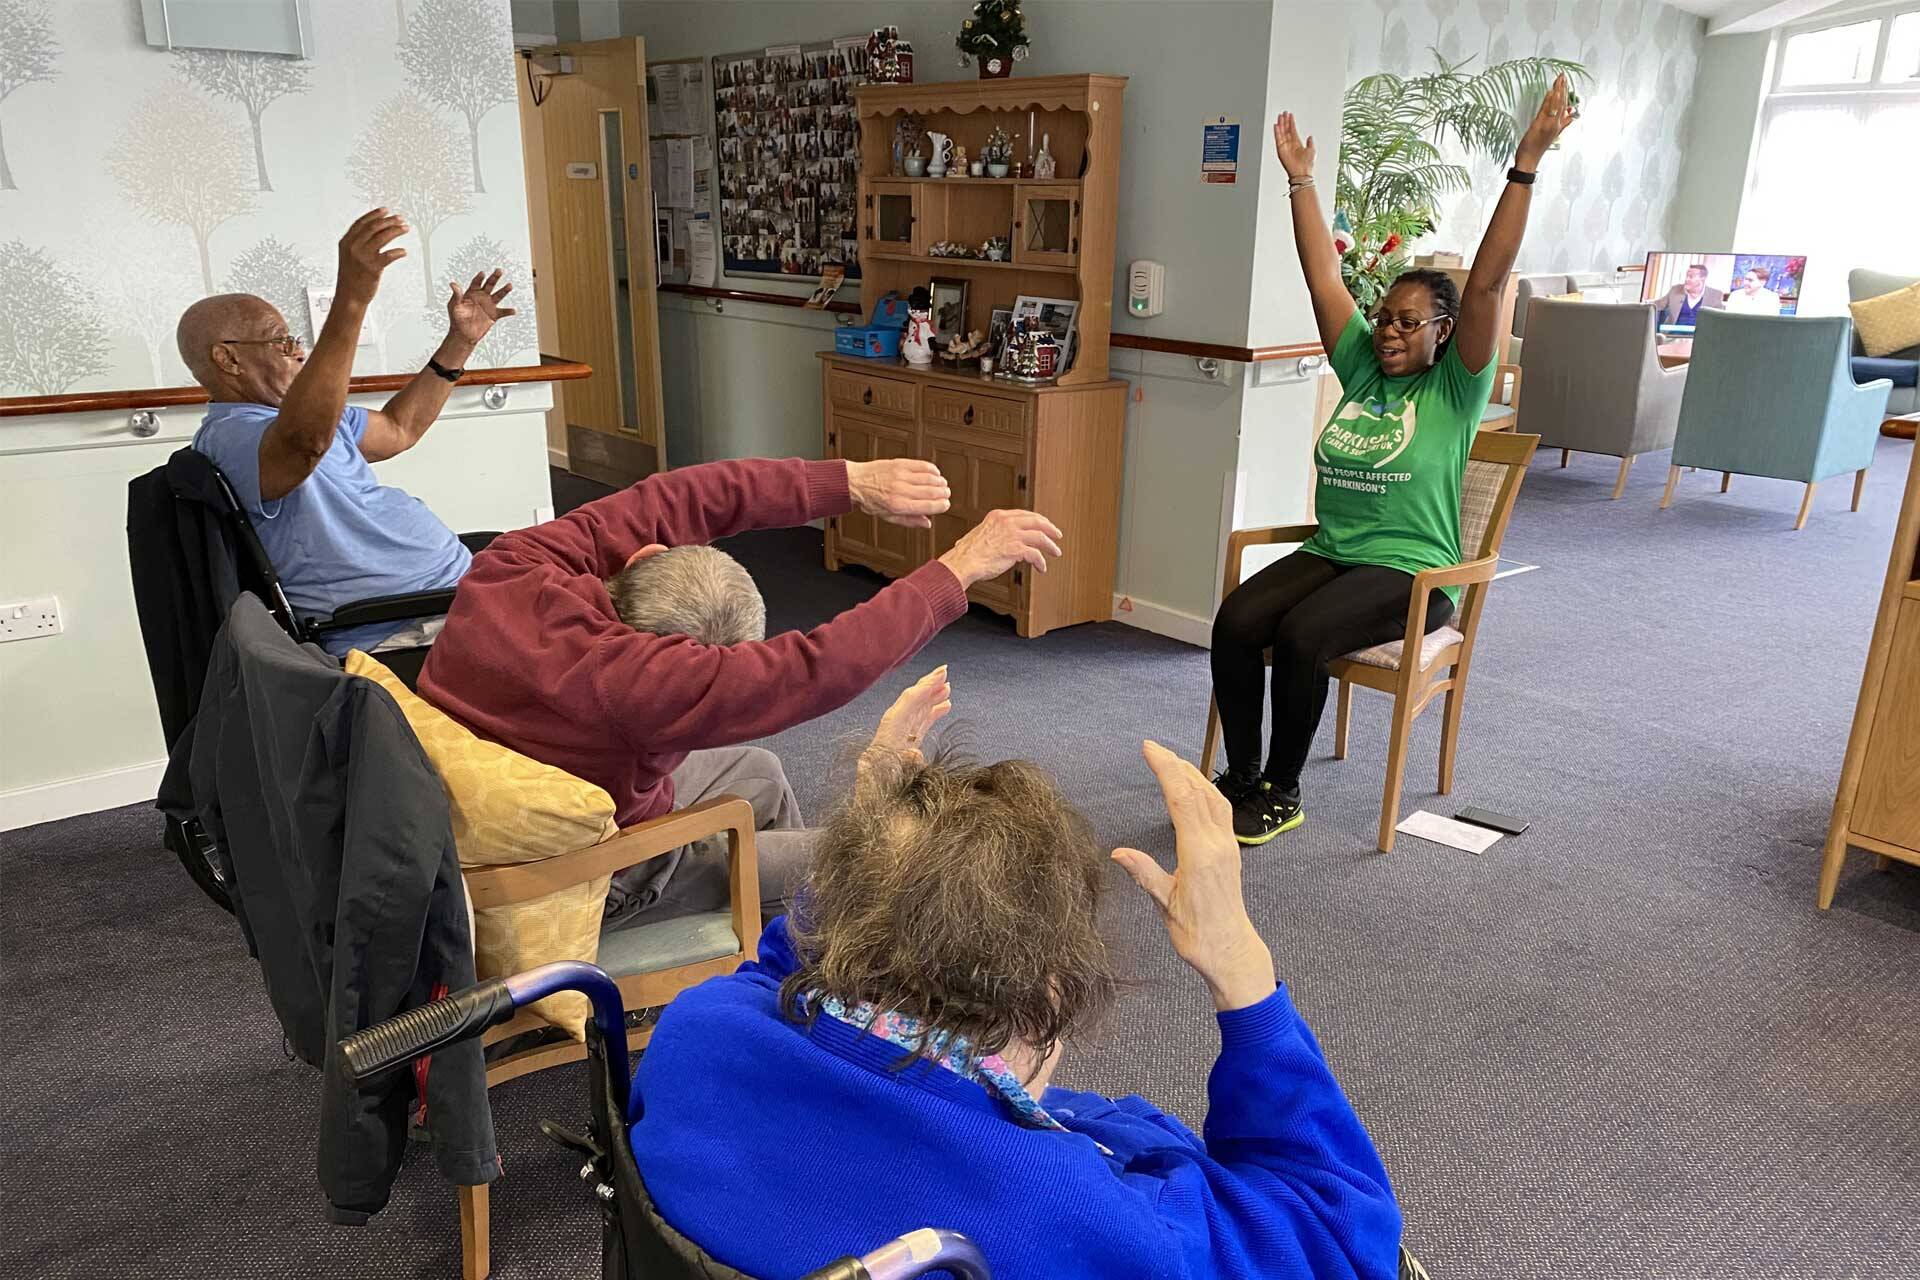 A therapy session for people with Parkinson's, organised by PCSUK